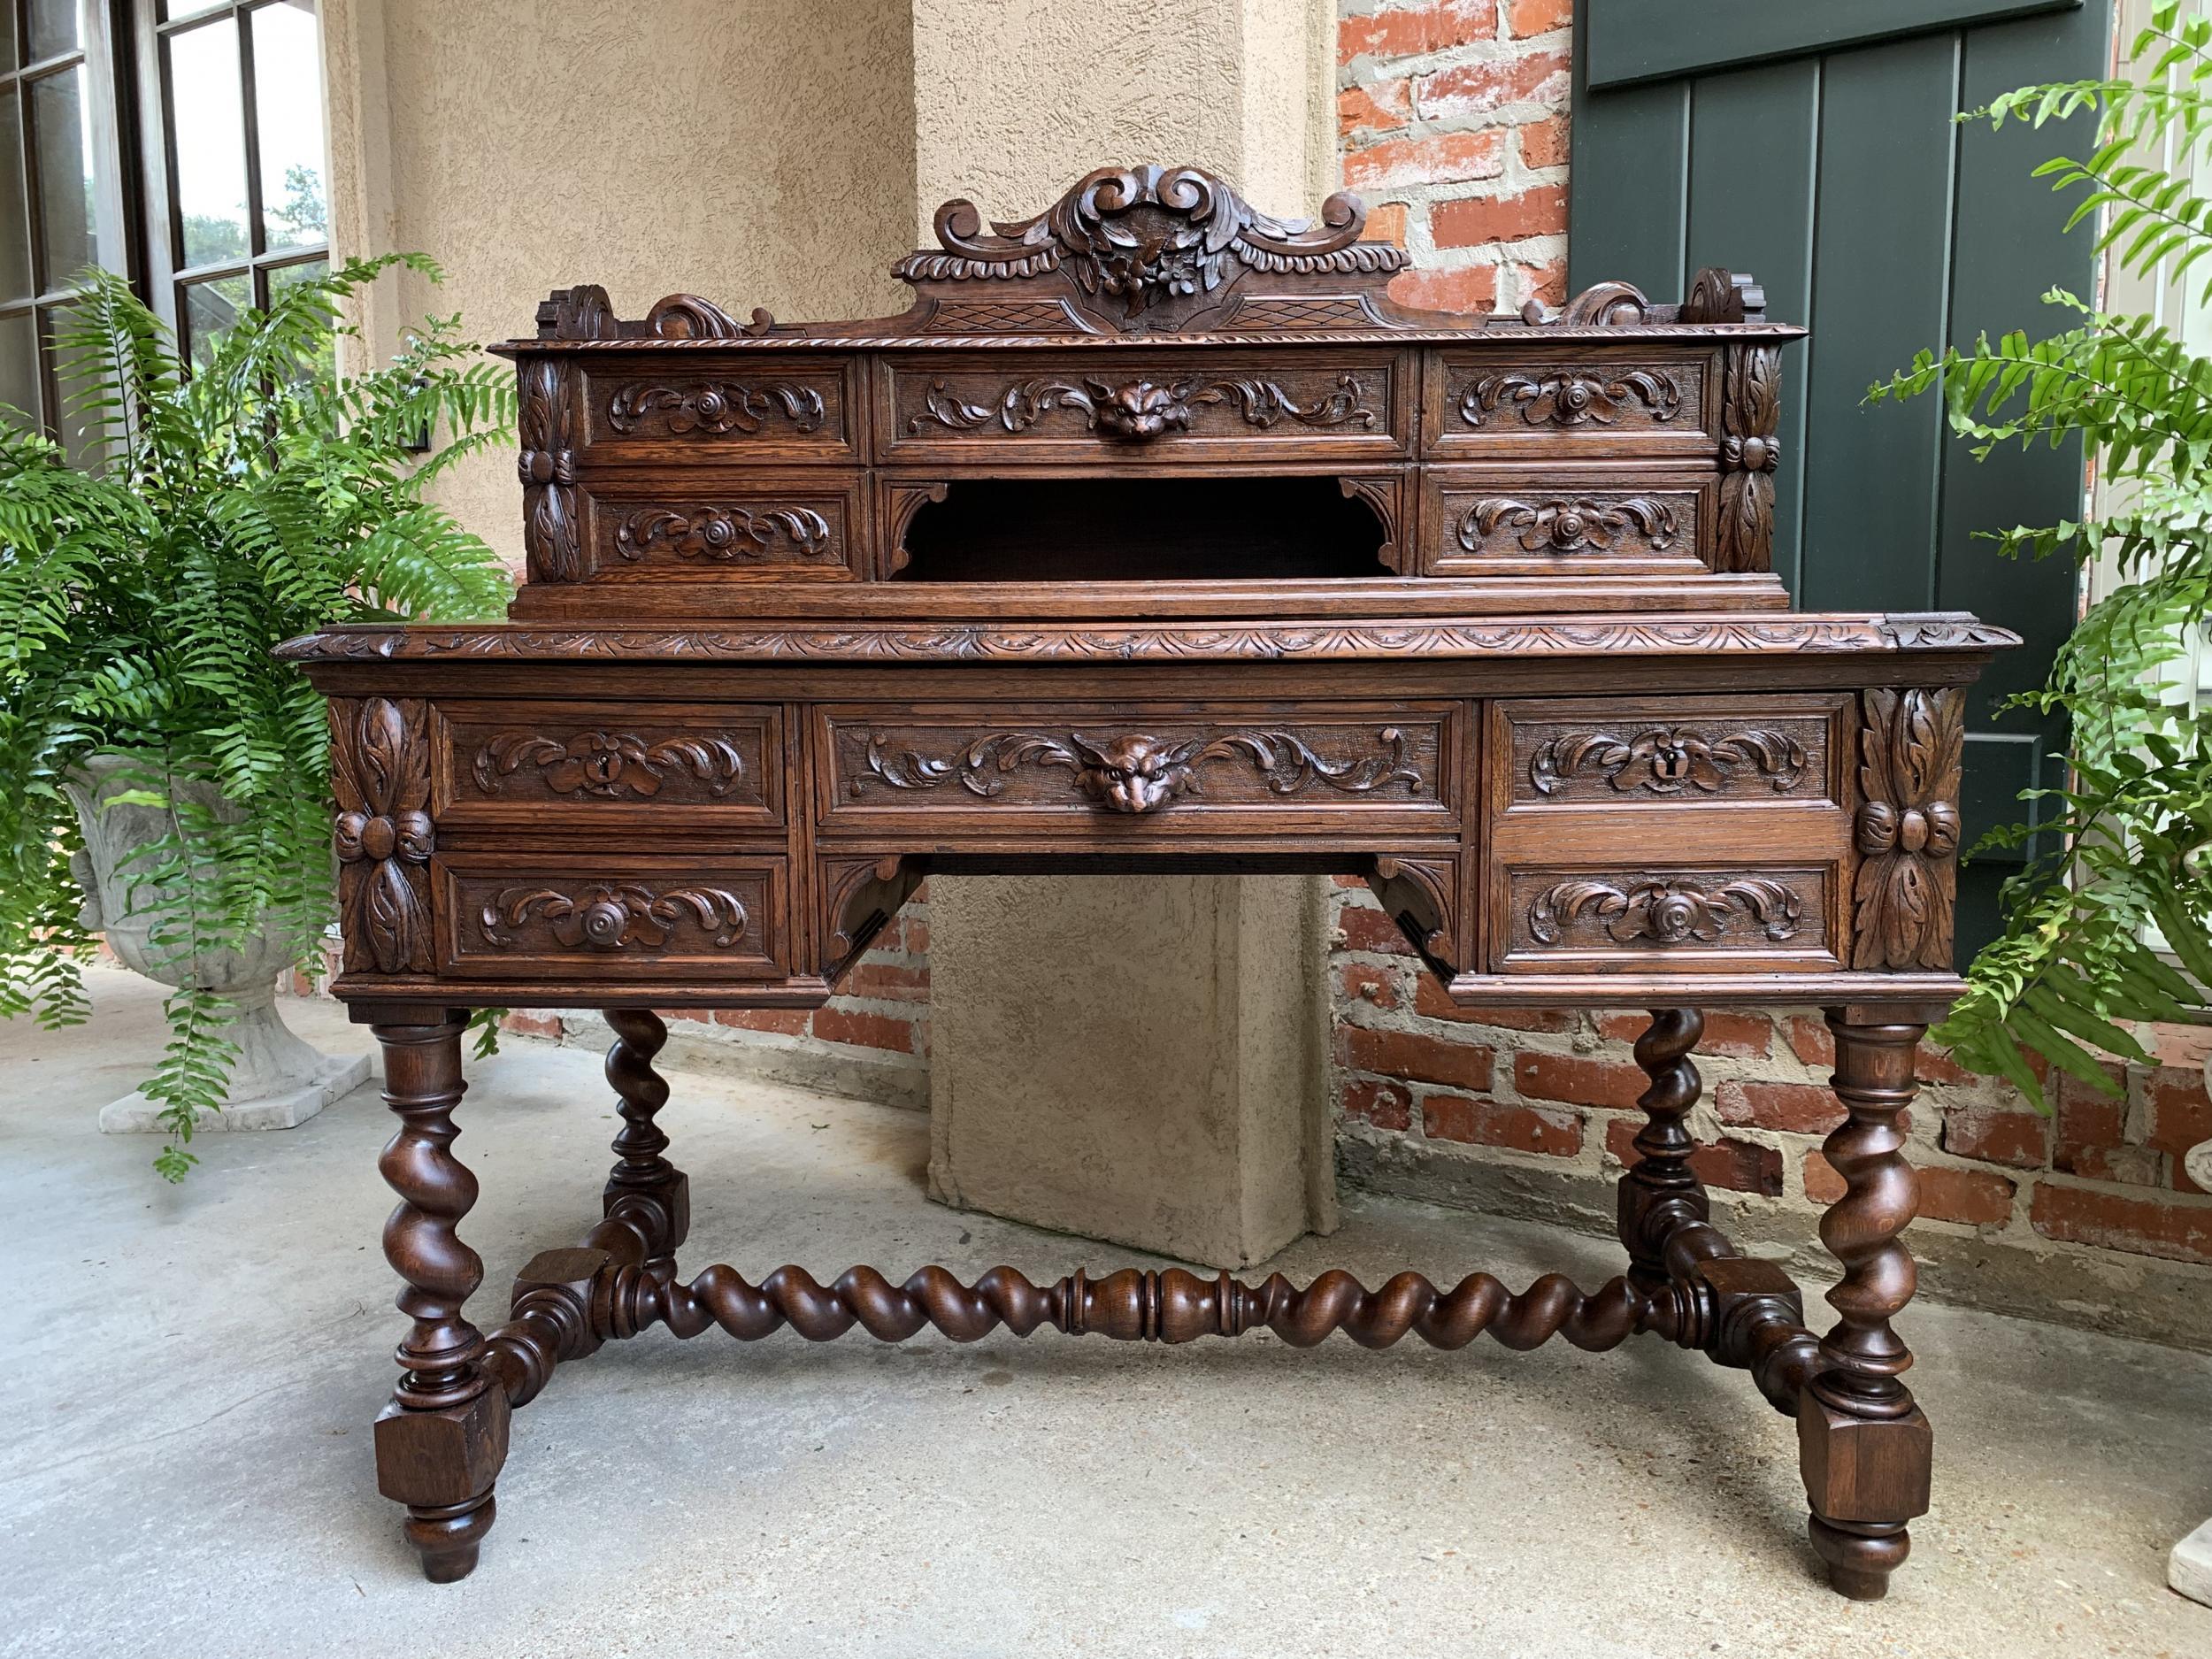 Antique French carved oak Renaissance desk barley twist Gothic library 19th c

~Direct from France~
A superb antique French oak desk with exquisite, ornate carvings!
~The upper desk has a beautiful carved crown with center ribbon/wreath and